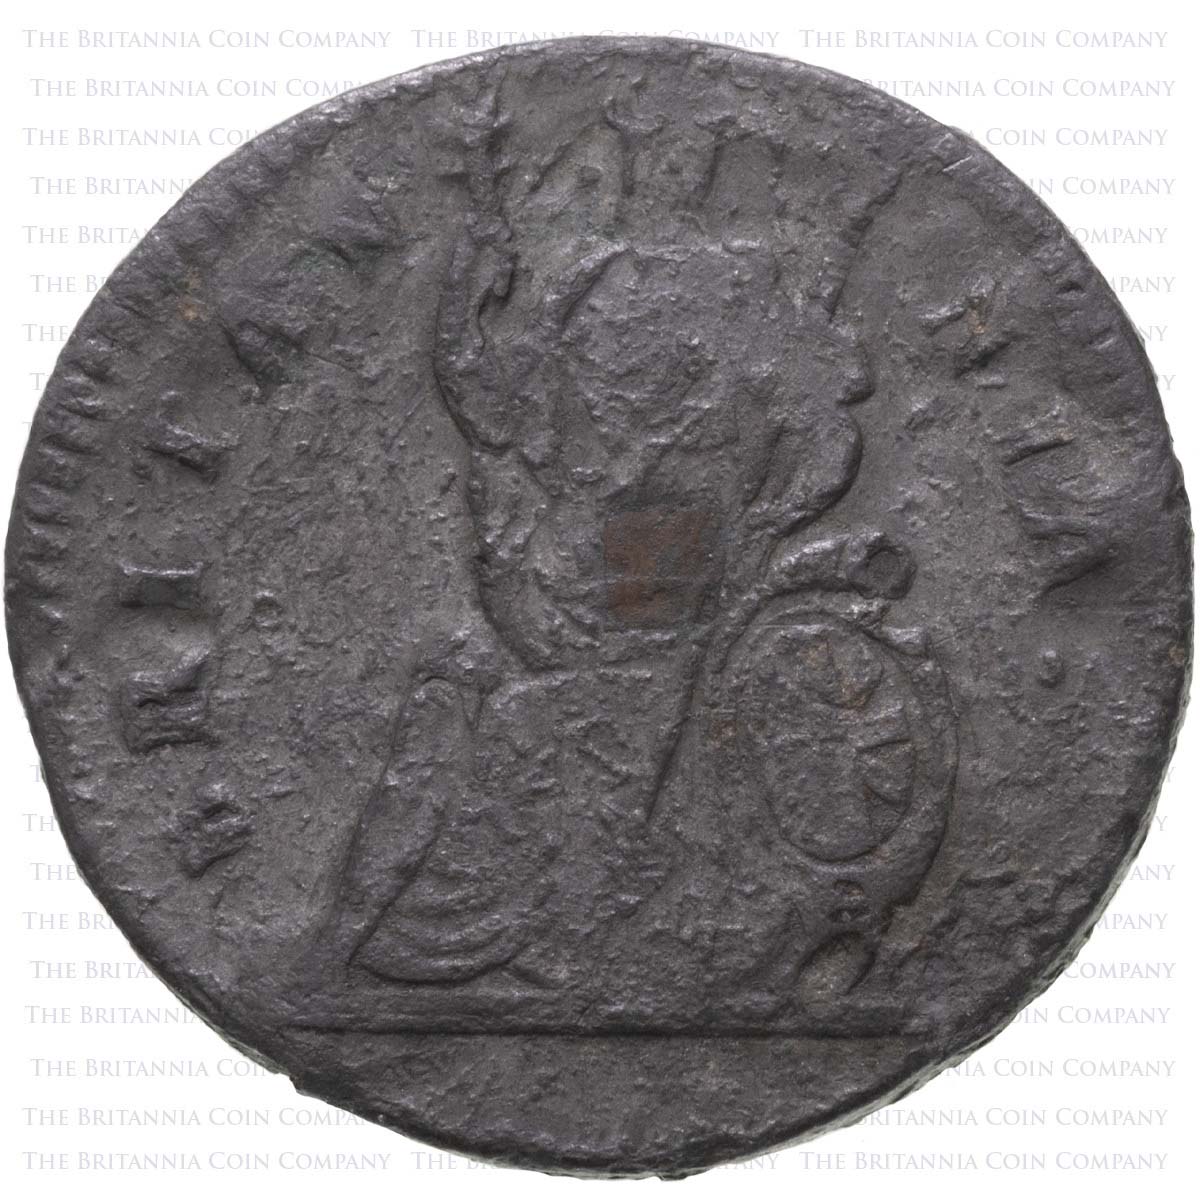 1684 King Charles II Tin Issue Farthing Coin Reverse